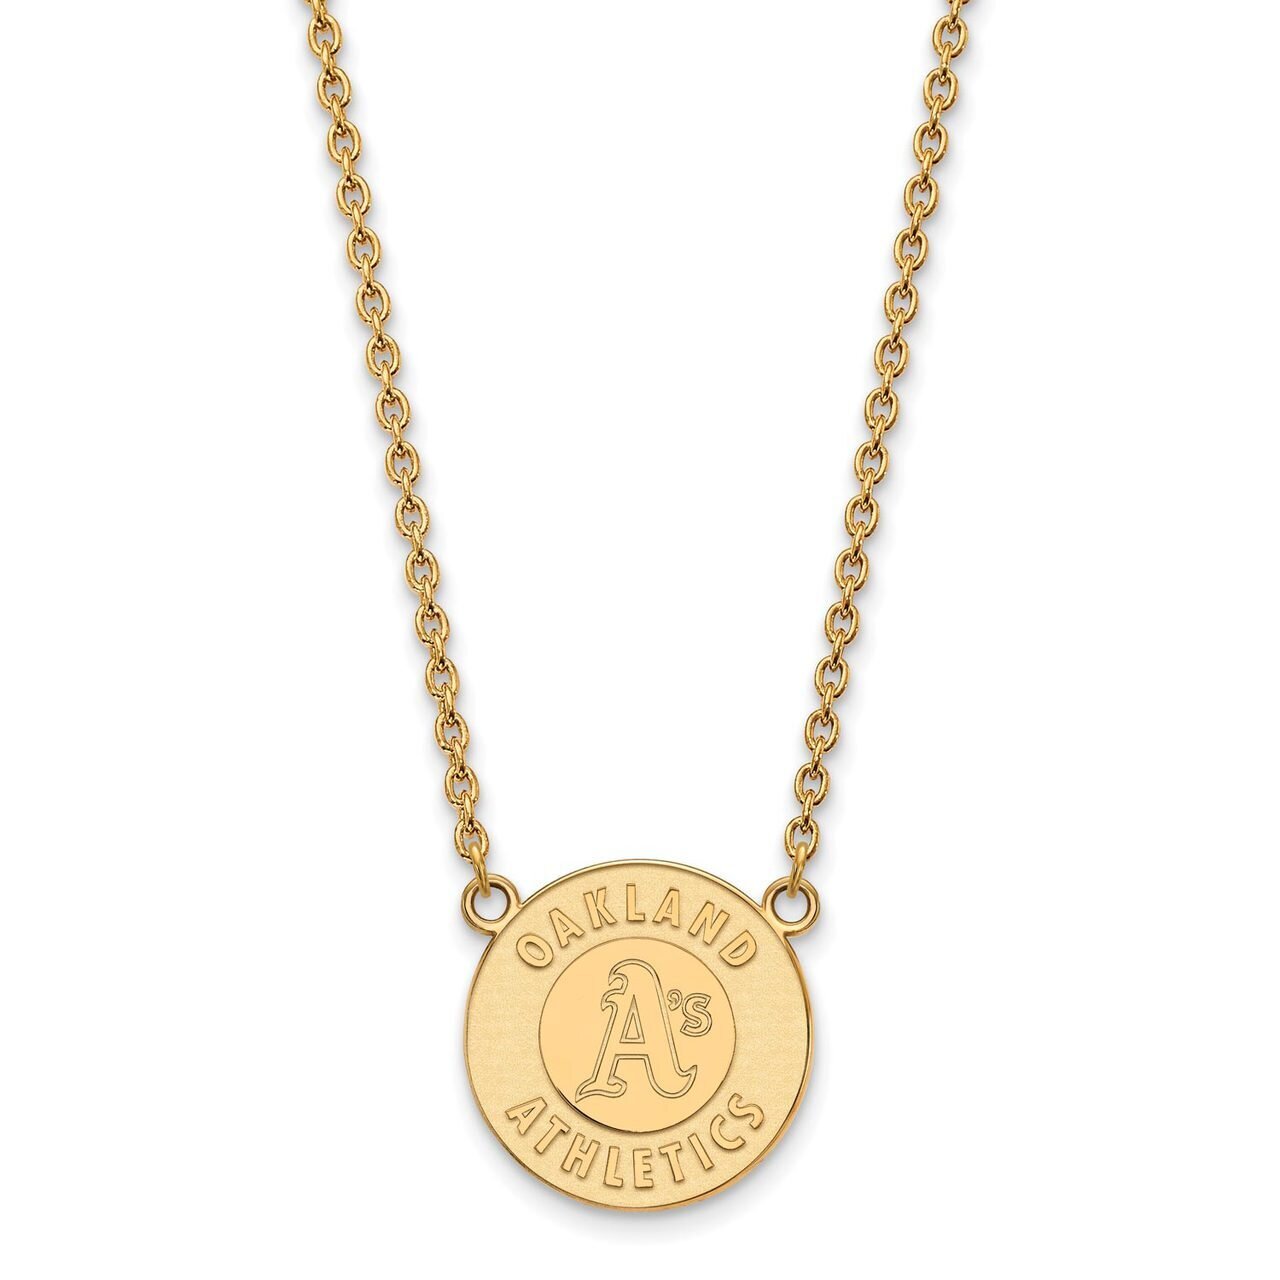 Oakland Athletics Large Pendant with Chain Necklace Gold-plated Silver GP010ATH-18